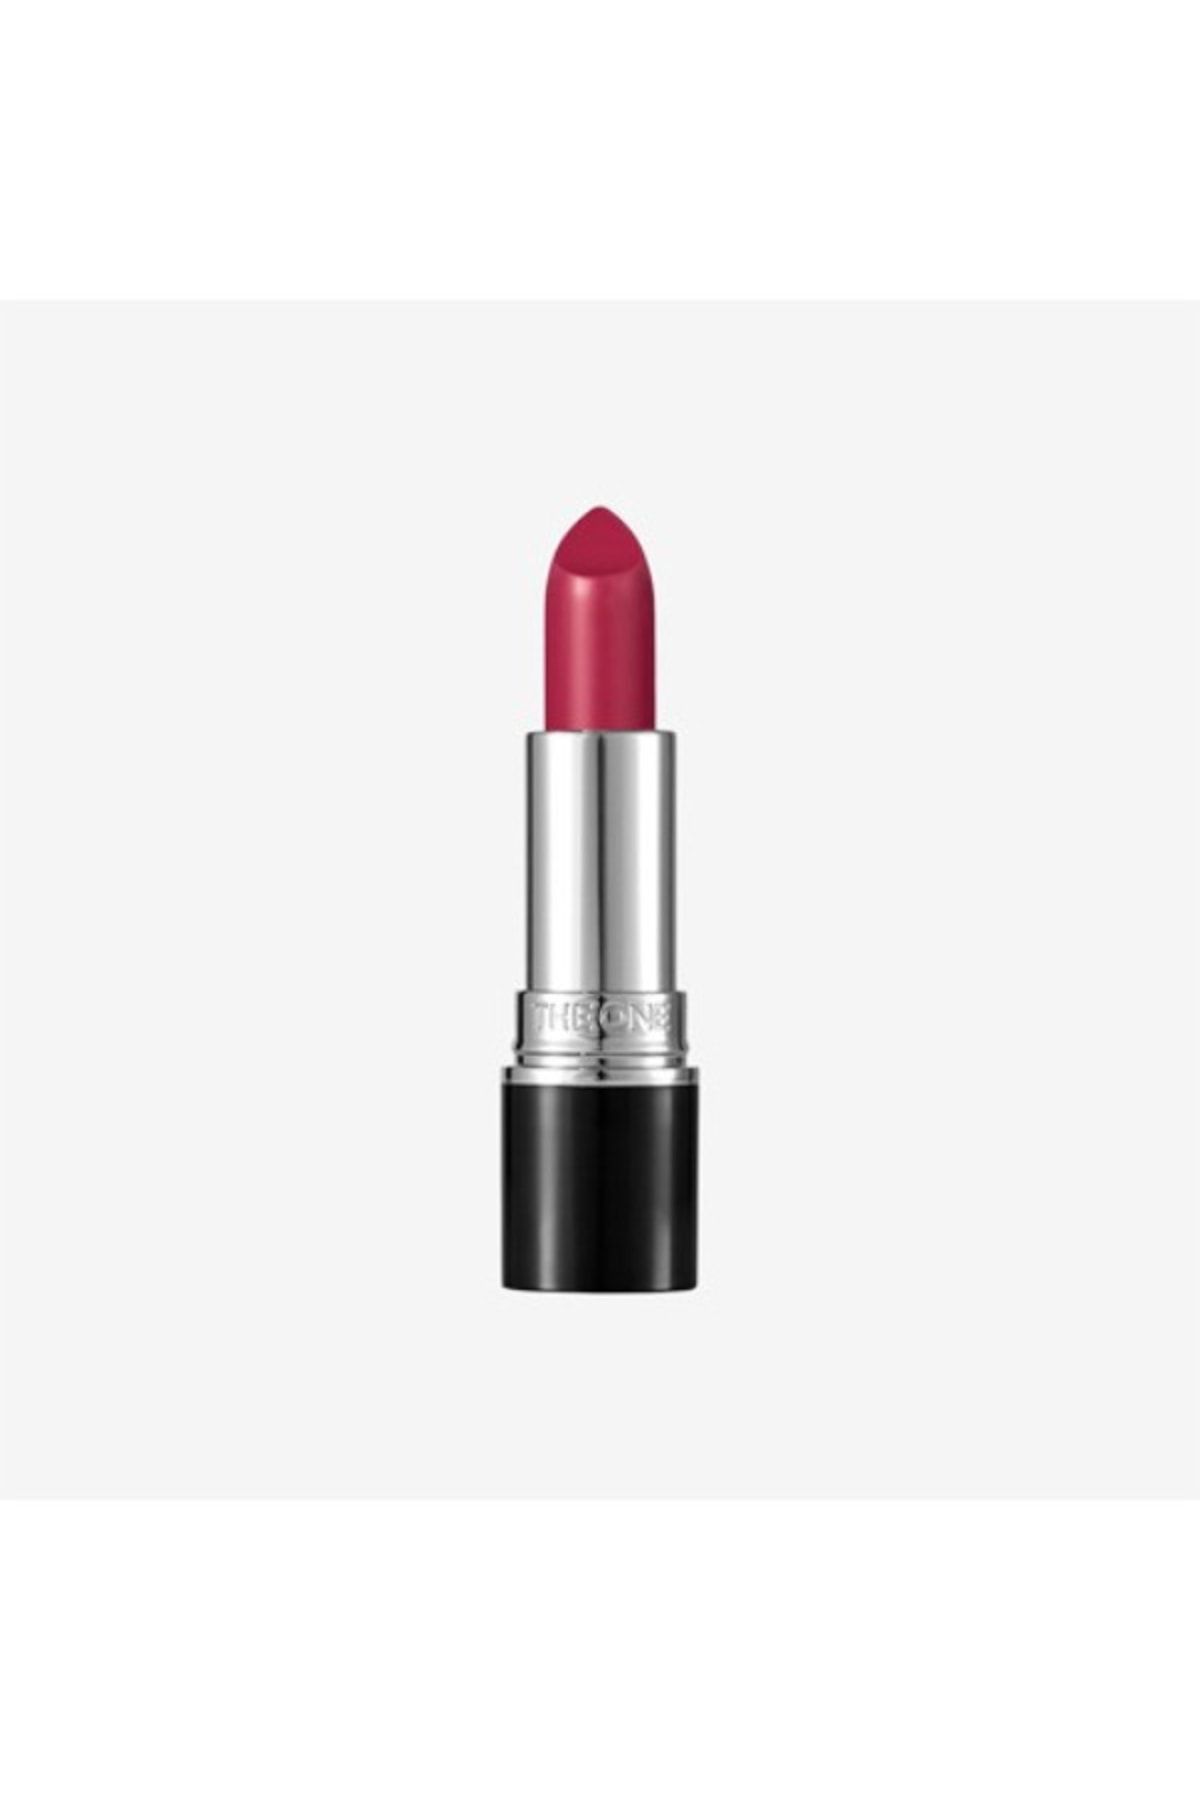 Oriflame The One Colour Stylist Ultimate Ruj Cranberry Crush 3,8g.-37657